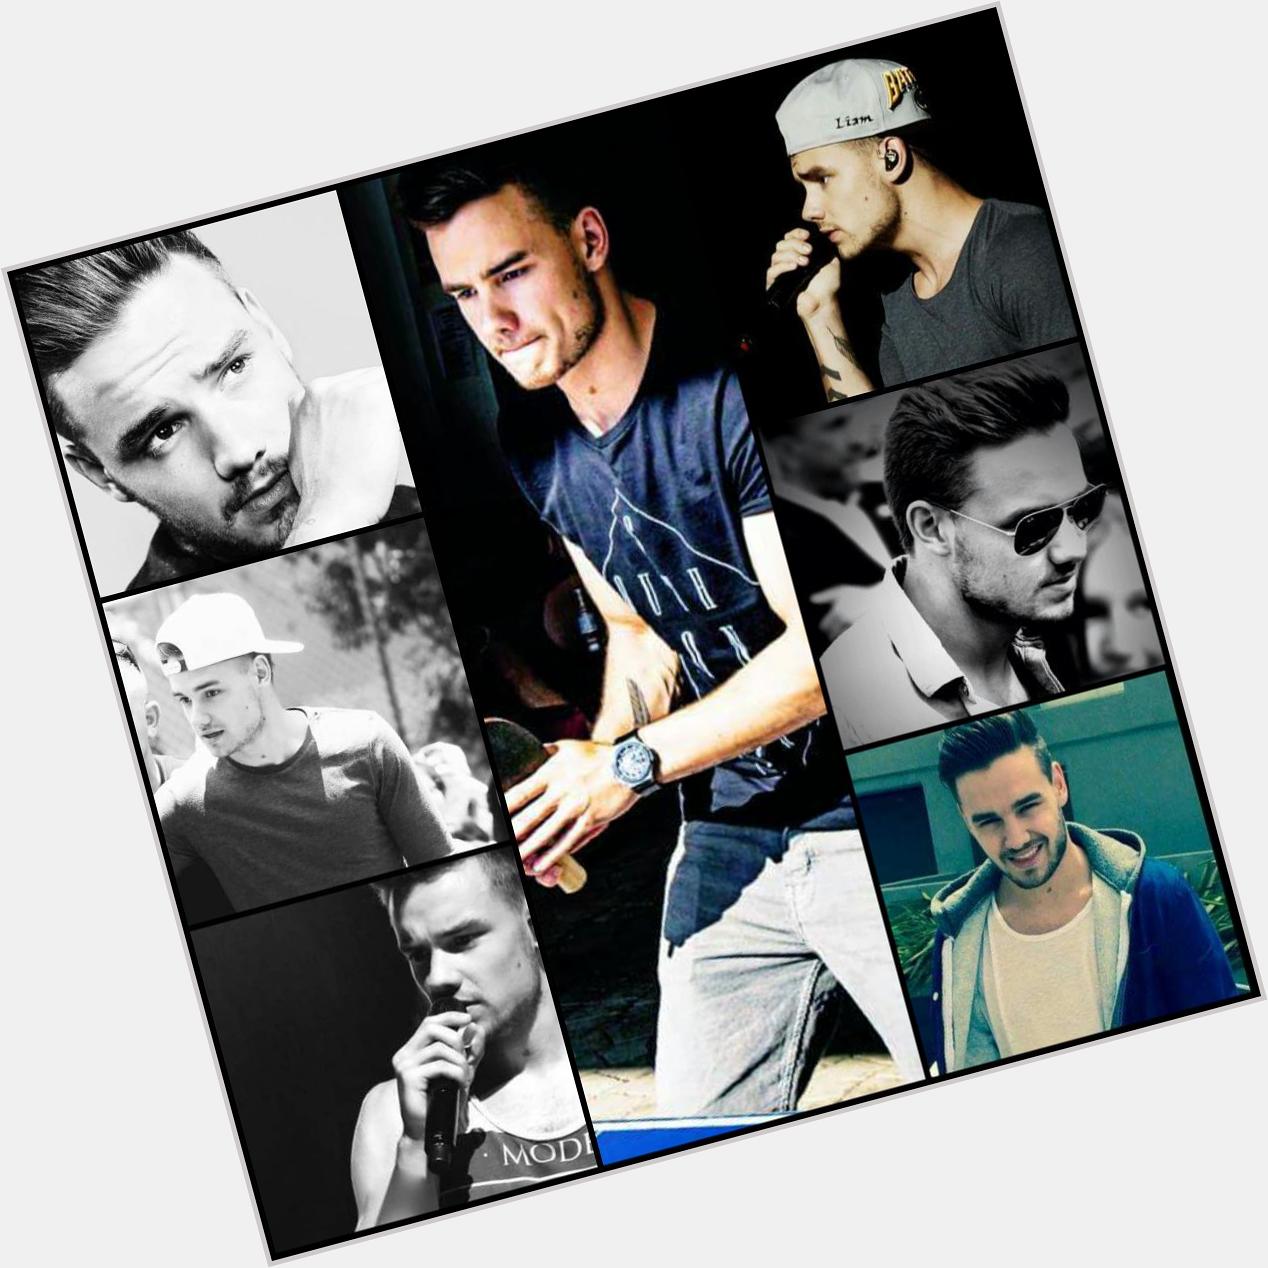  happy birthday payno Love you so much ... wissal from Morocco  